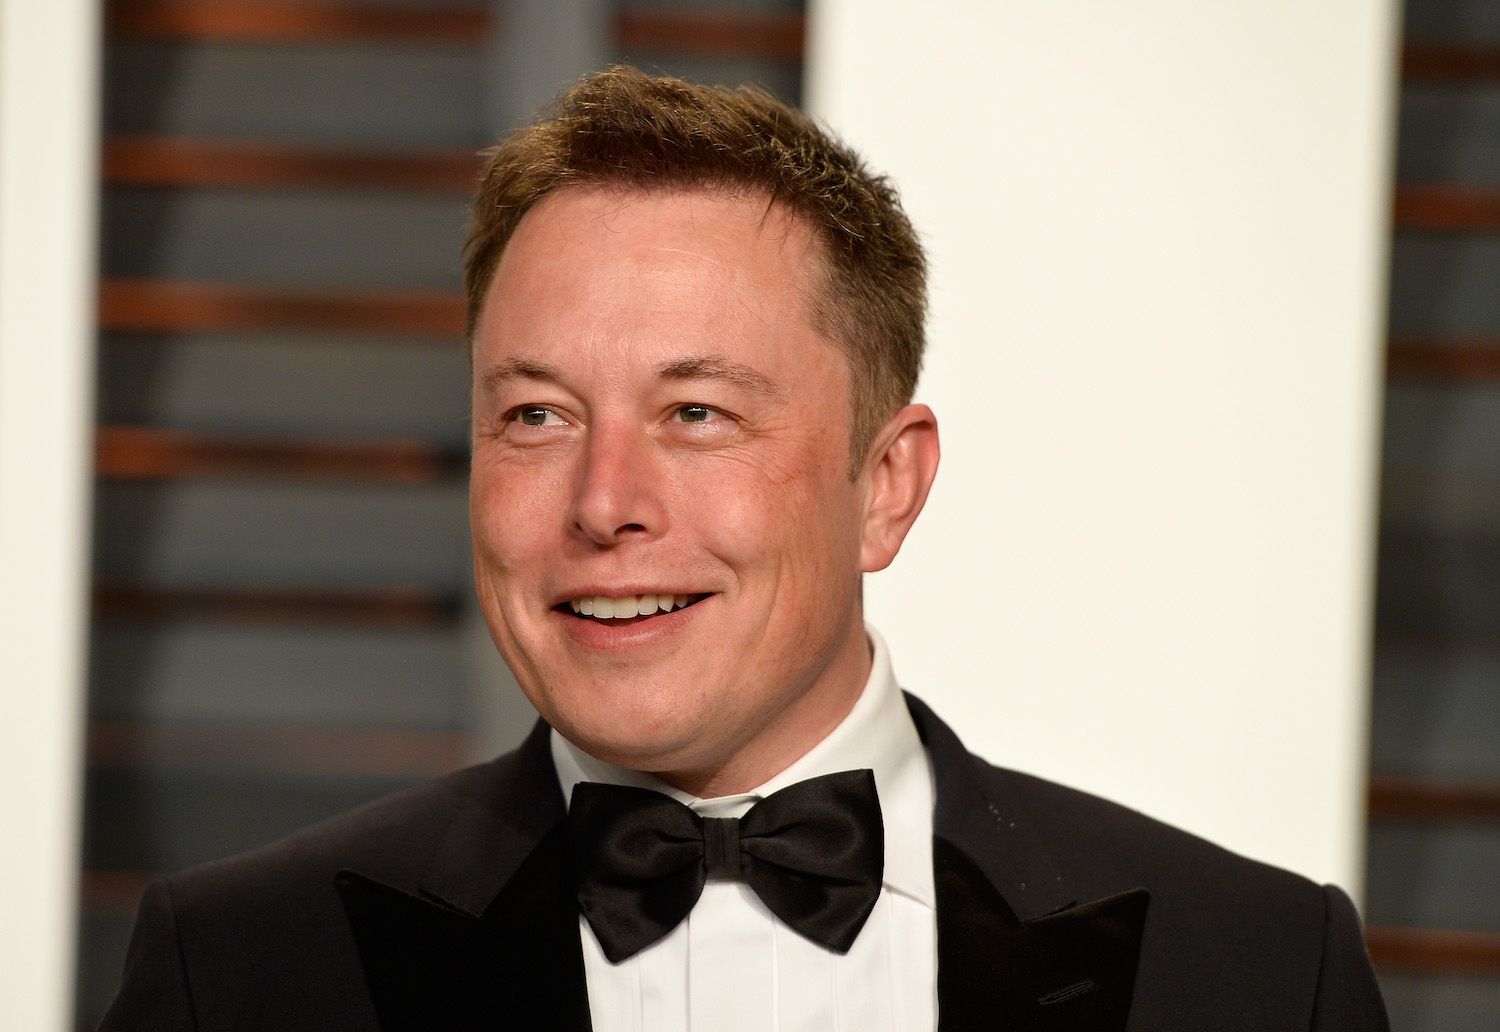 Elon Musk, Tesla founder and CEO, has said he dislikes the word recall. Tesla Refused To Recall Autopilot Cars Crashing Into First Responders, NHTSA Government Demands Answers as to why there was no Tesla recall. | Pascal Le Segretain/Getty Images